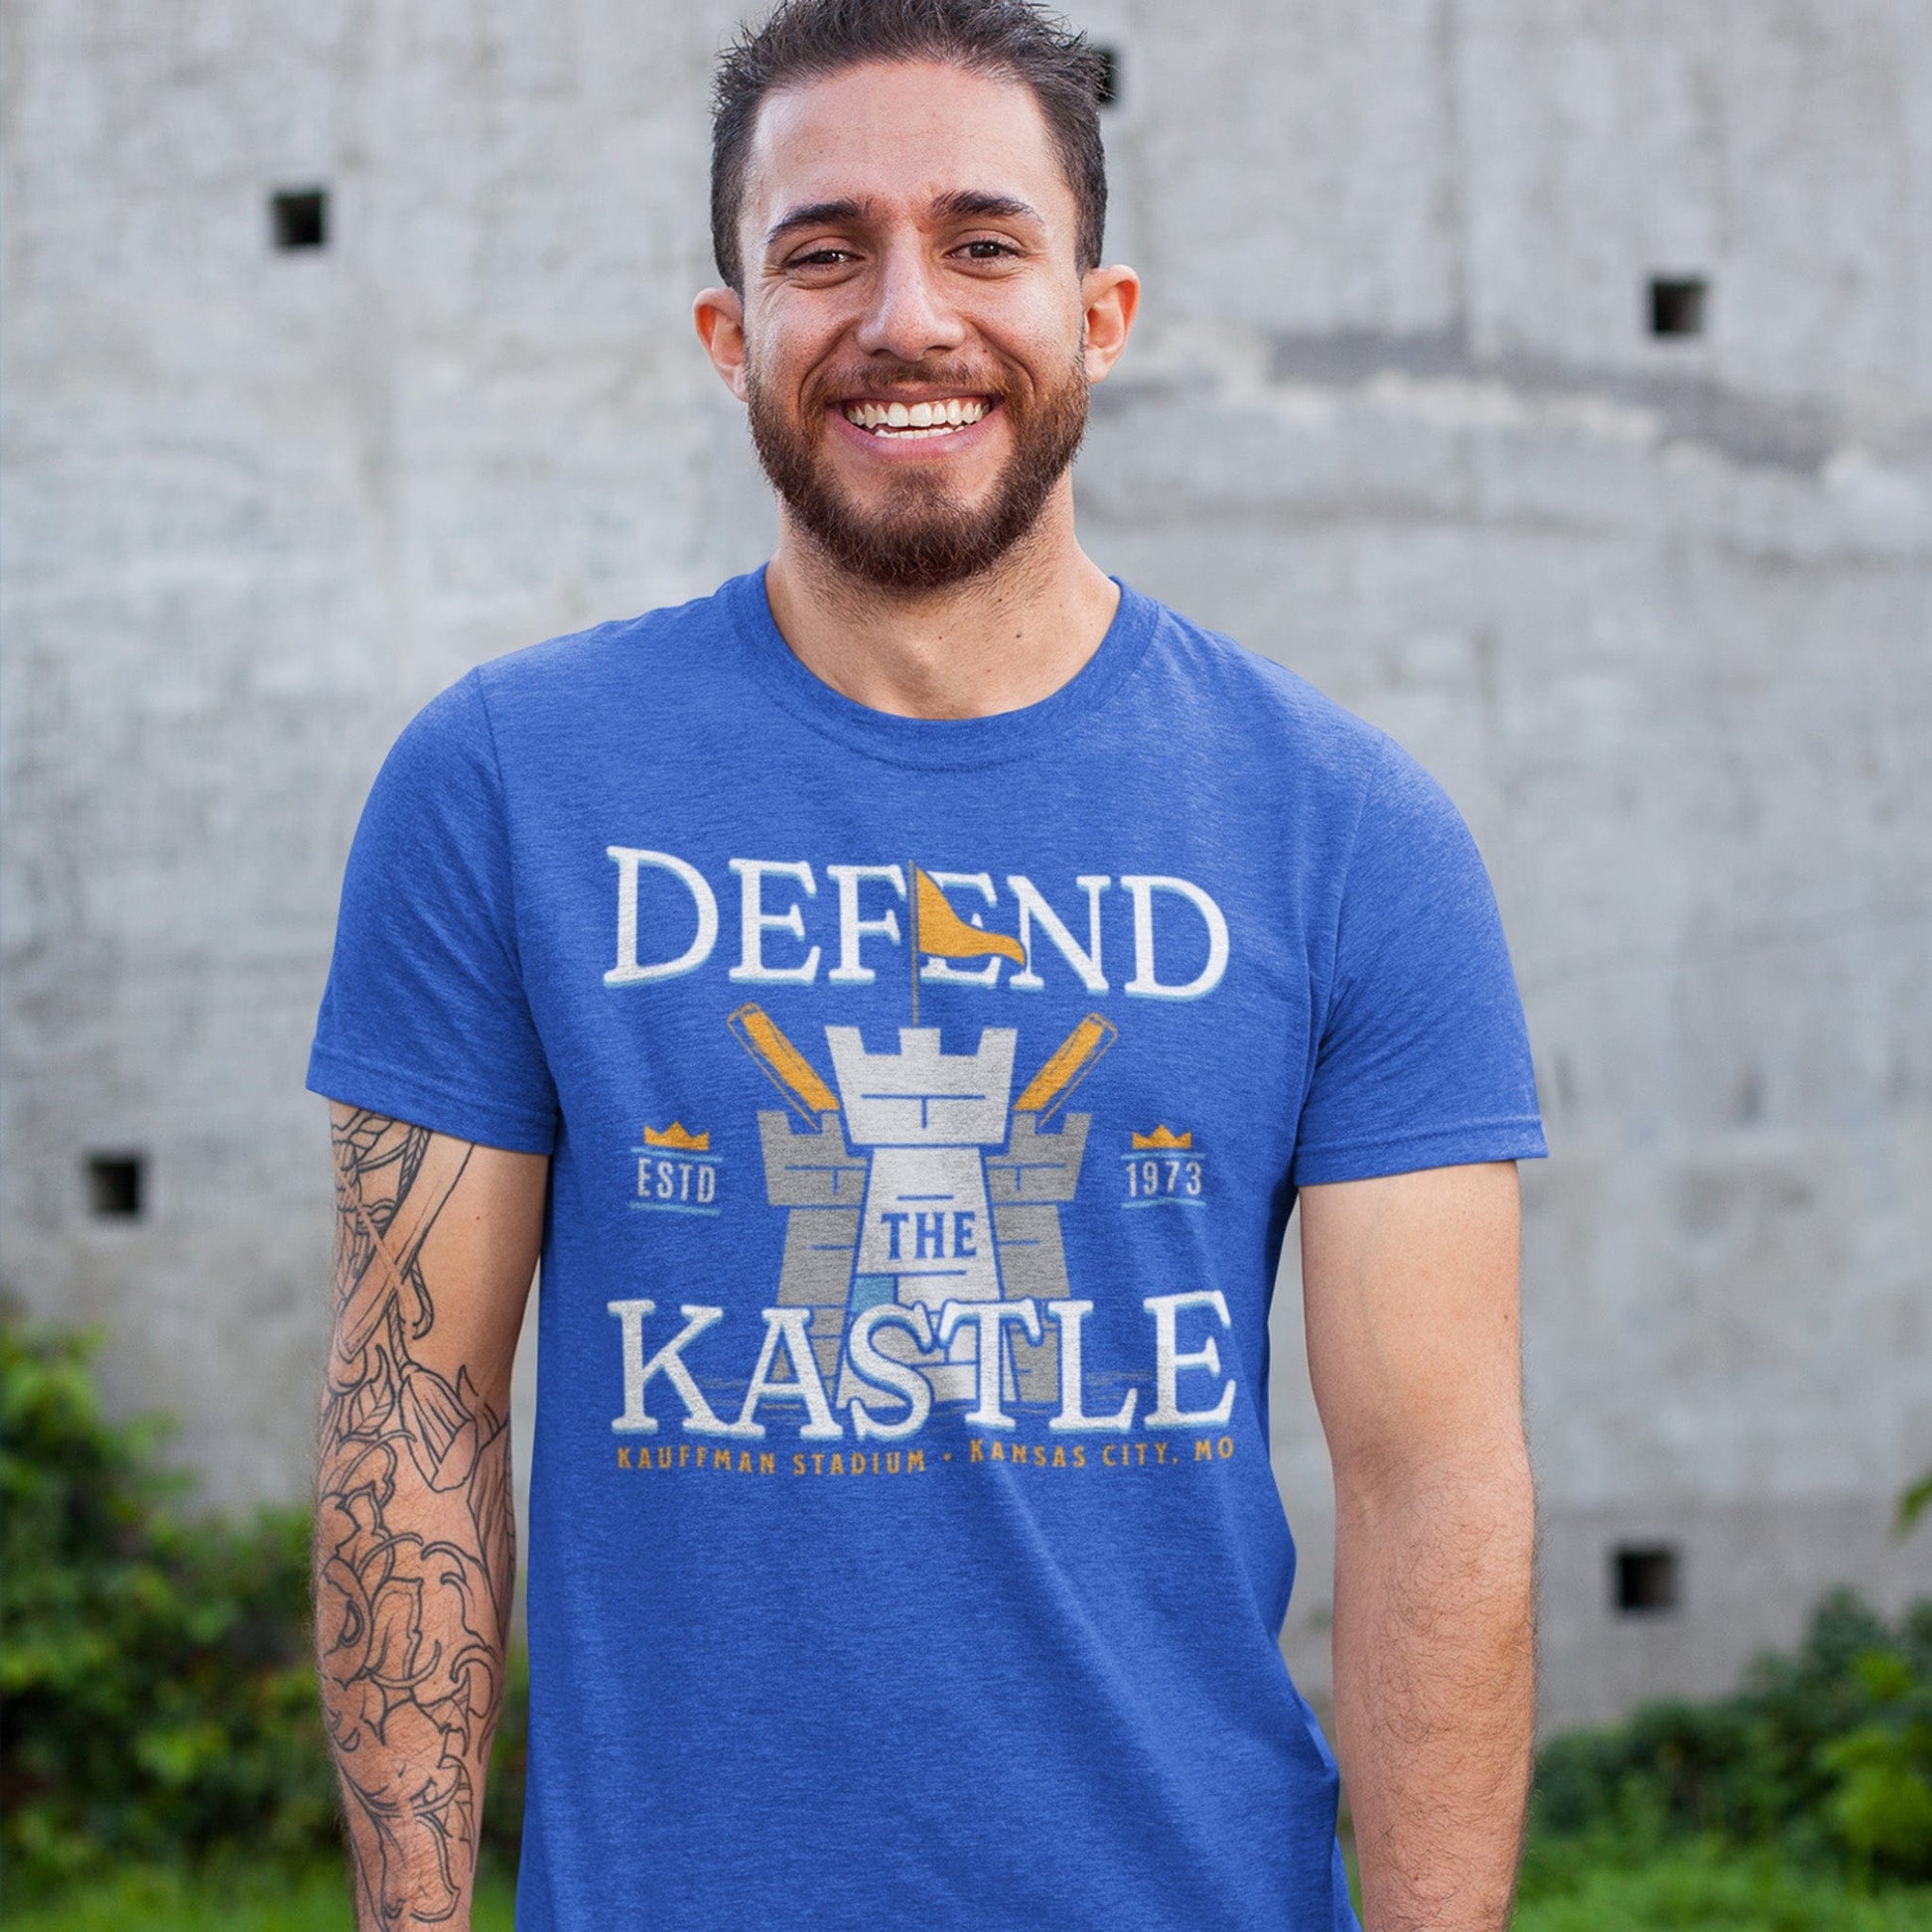 KC Swag Kansas City Royals powder, blue, gold DEFEND THE KASTLE on heather royal blue unisex t-shirt worn by male model standing in front of concrete wall